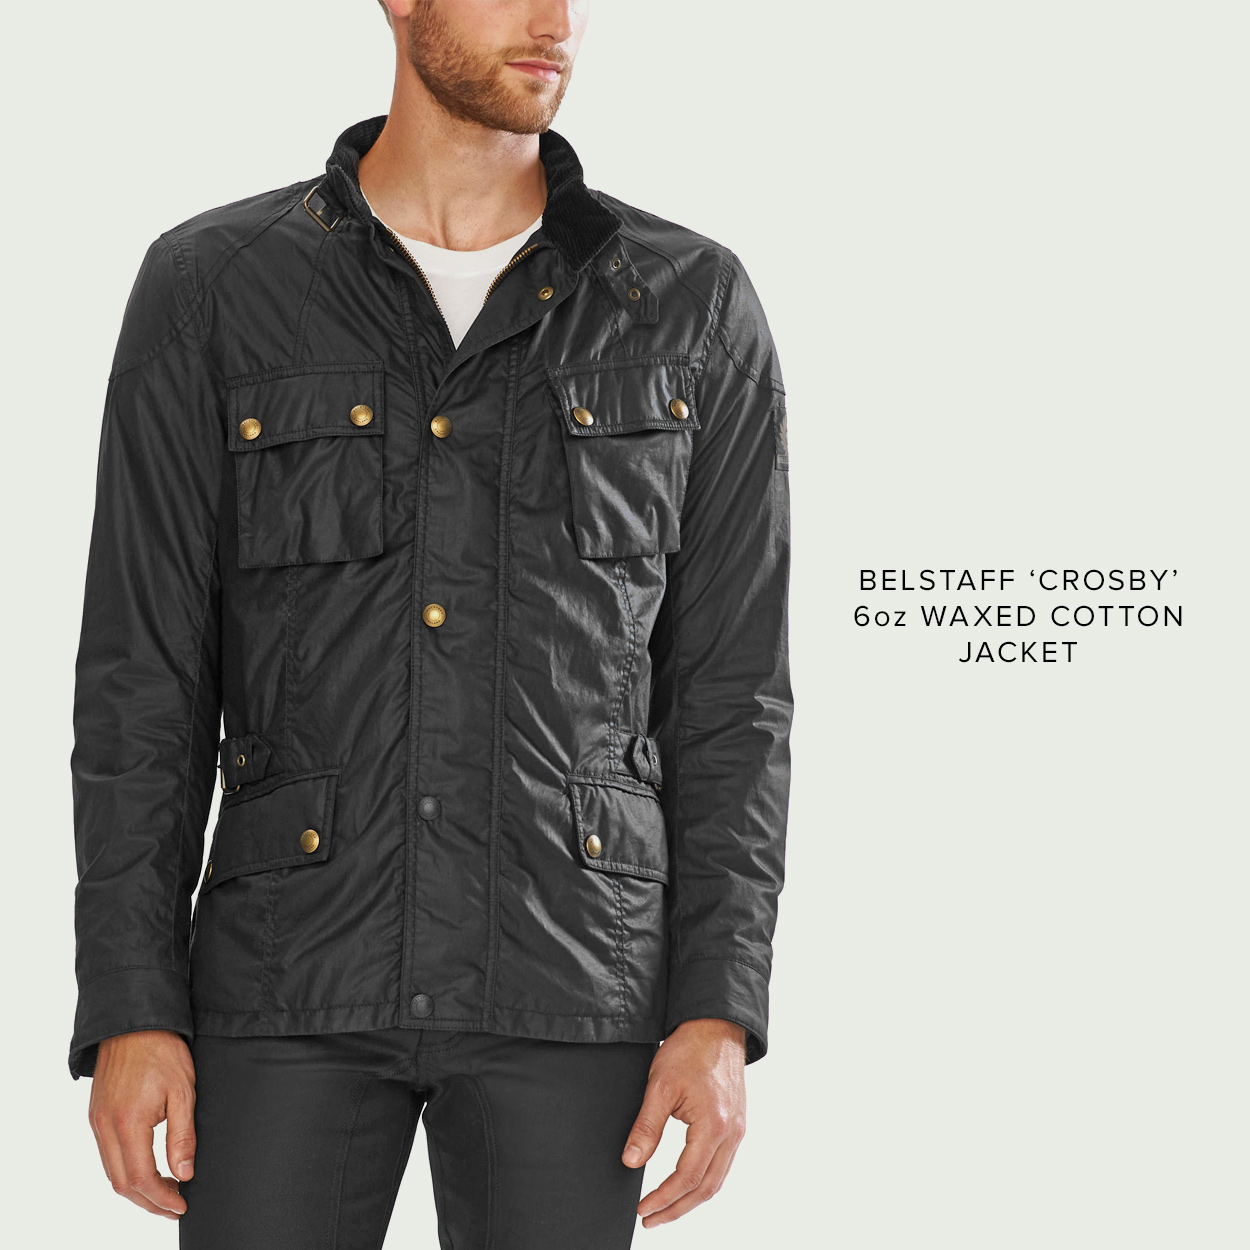 Retro practicality: Best waxed cotton motorcycle jackets